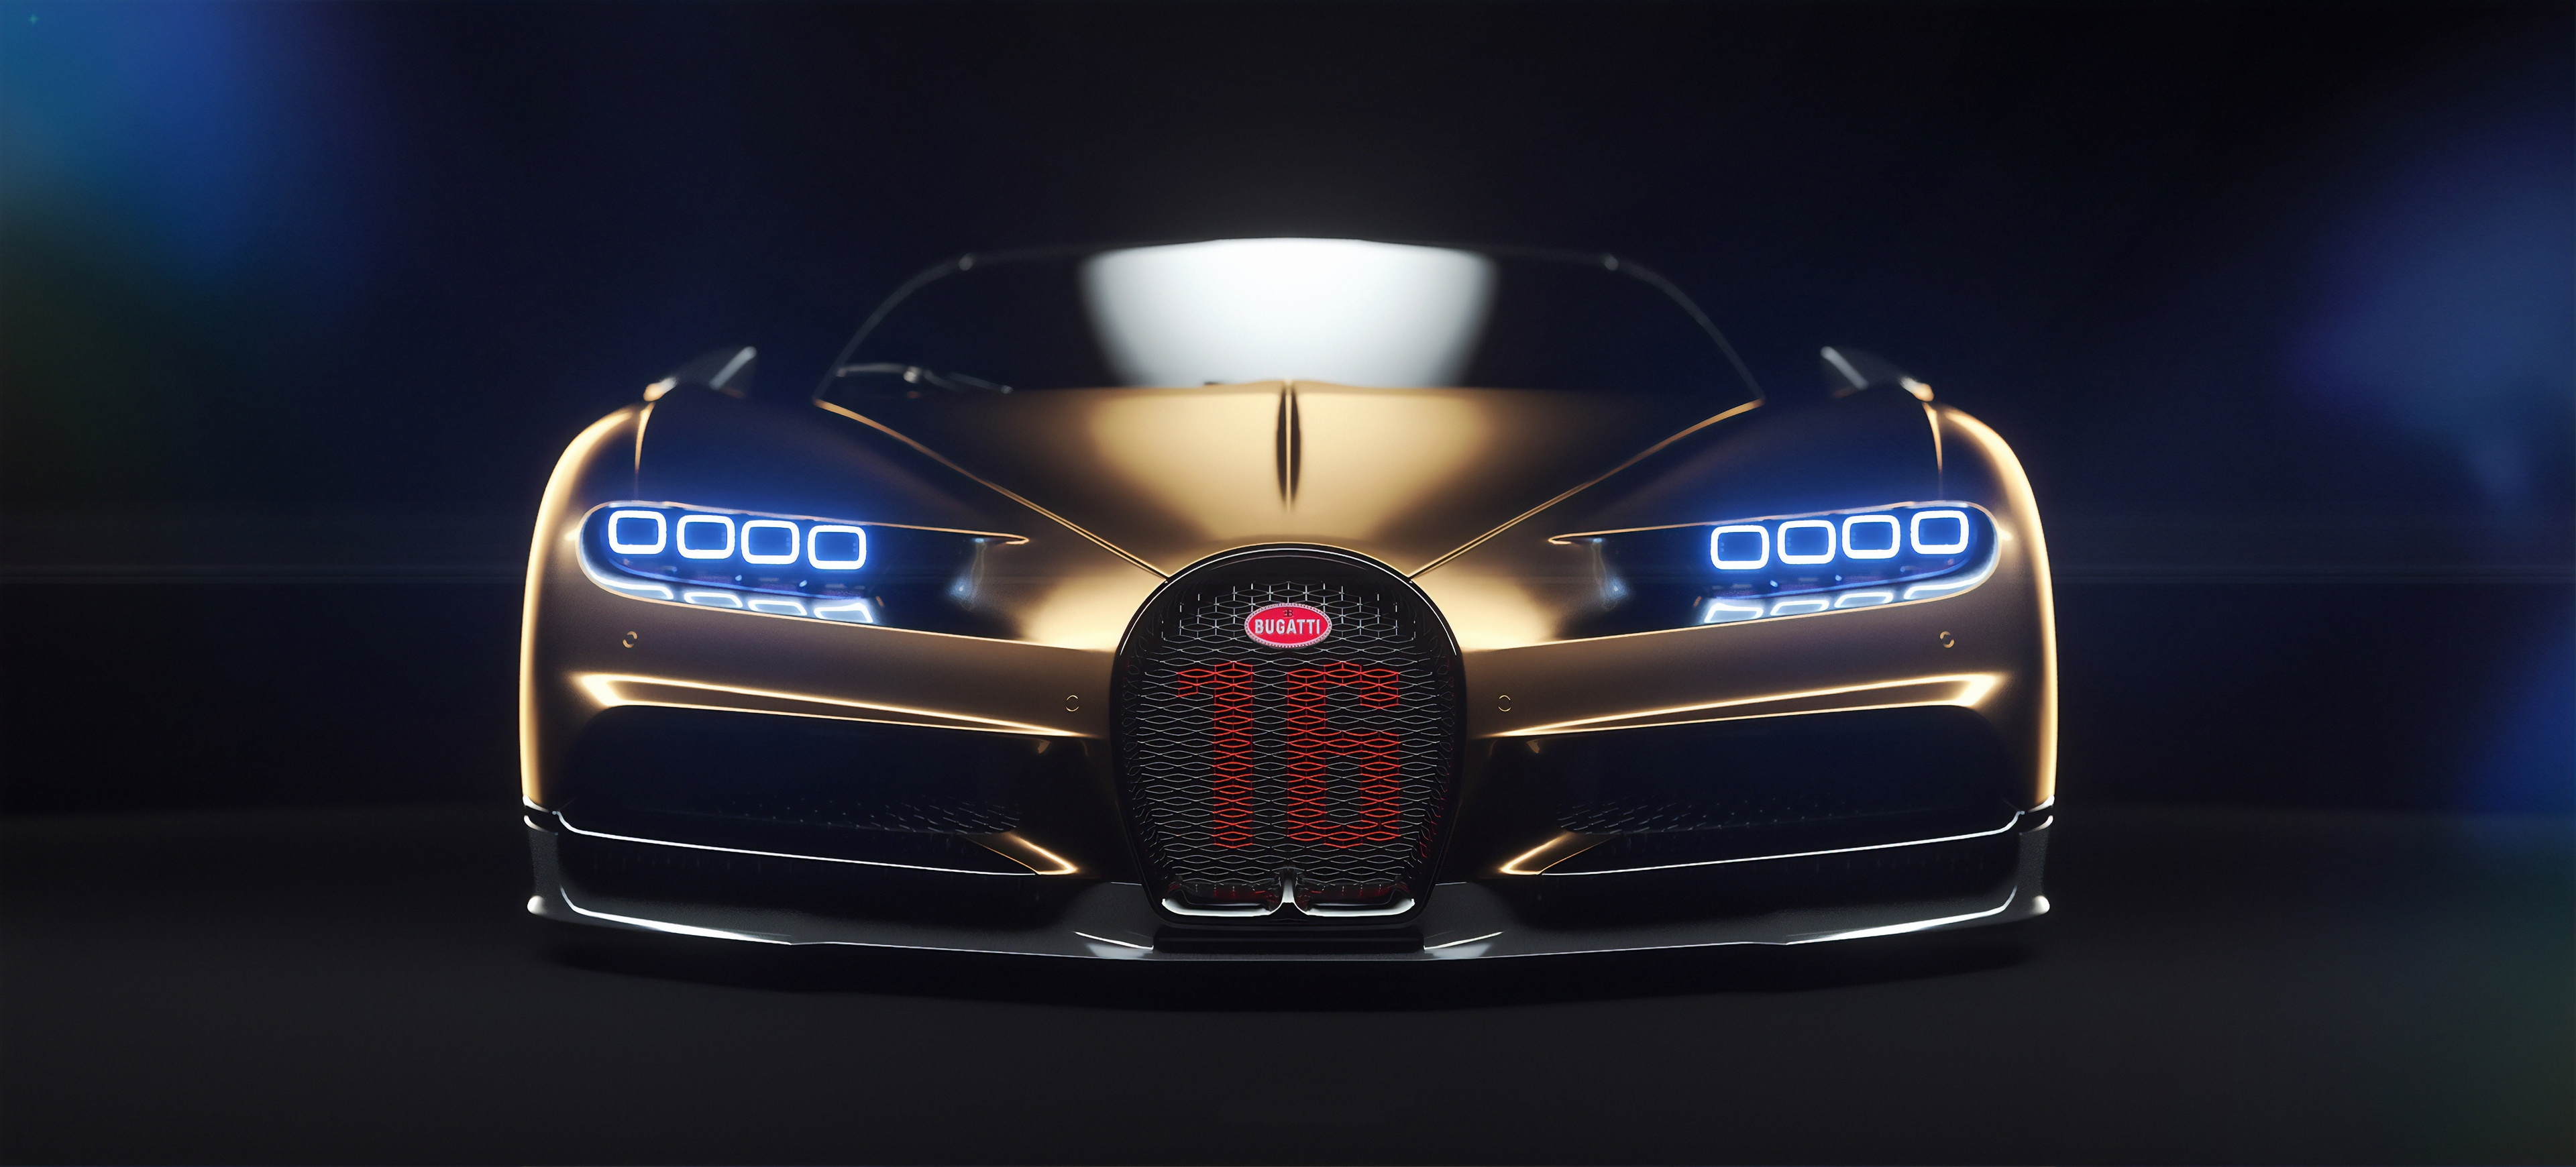 Bugatti Chiron Front, HD Cars, 4k Wallpapers, Images ...